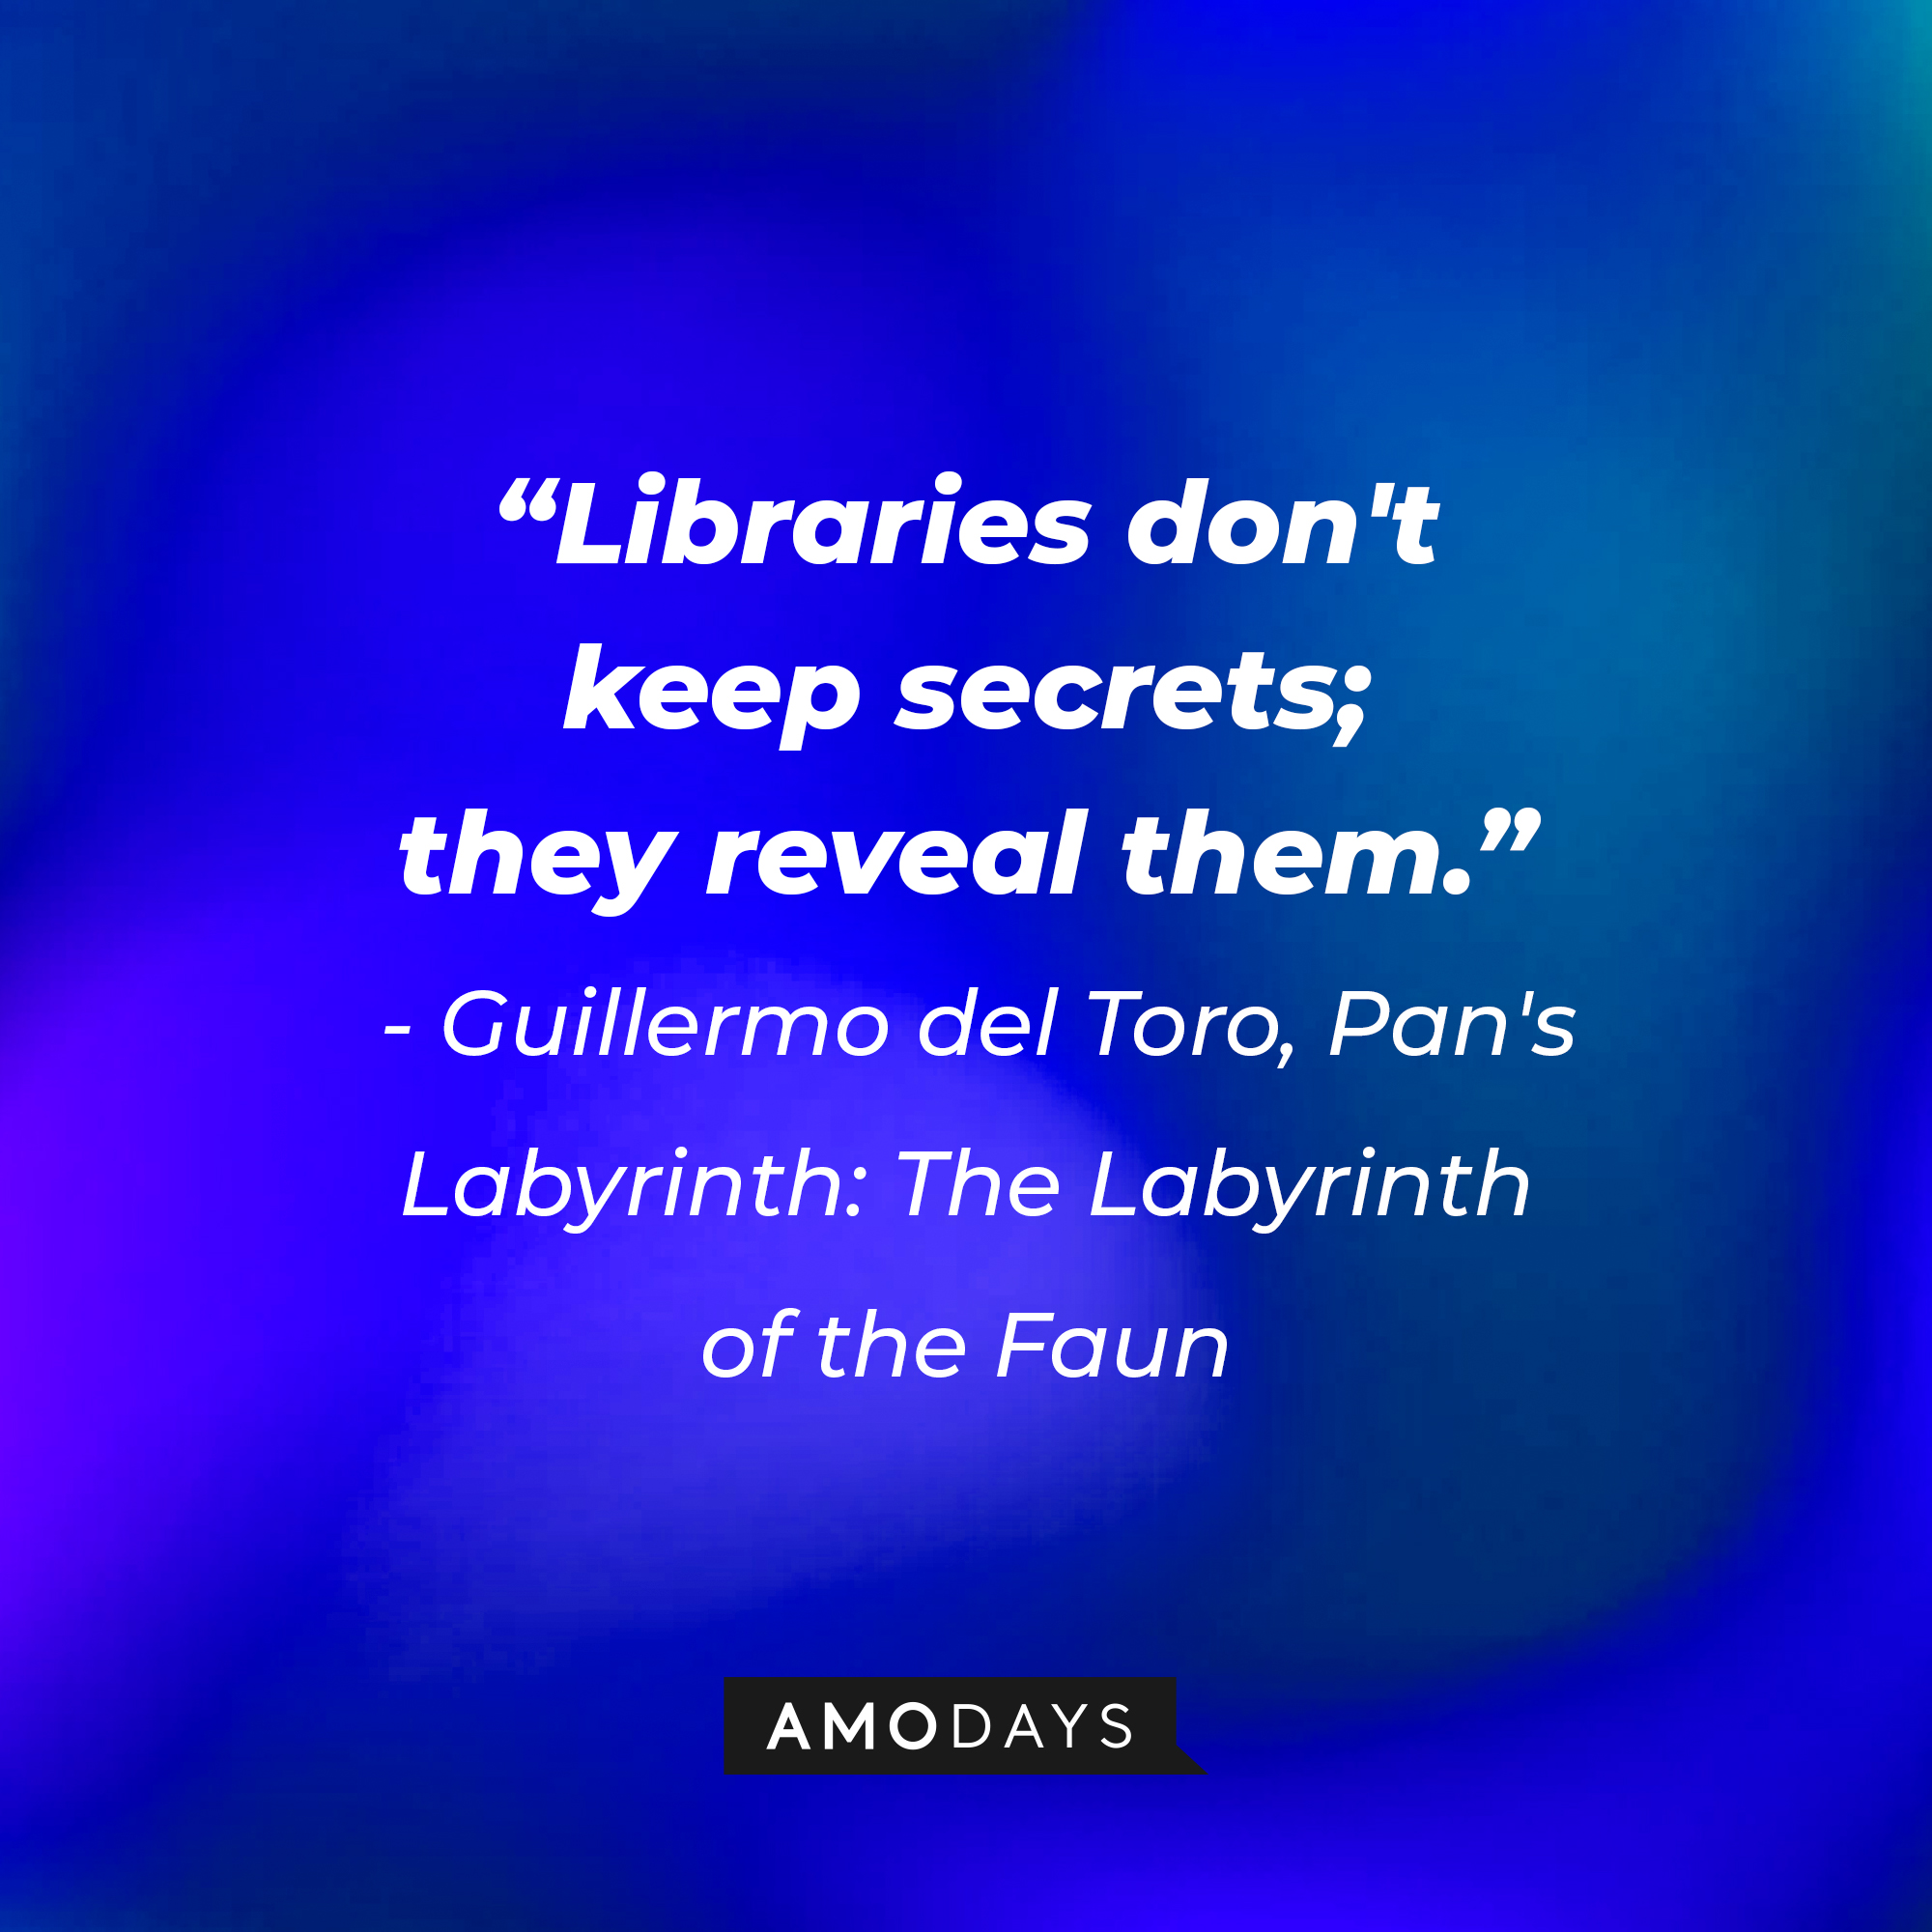 Guillermo del Toro's quote: "Libraries don't keep secrets; they reveal them." | Image: Amodays